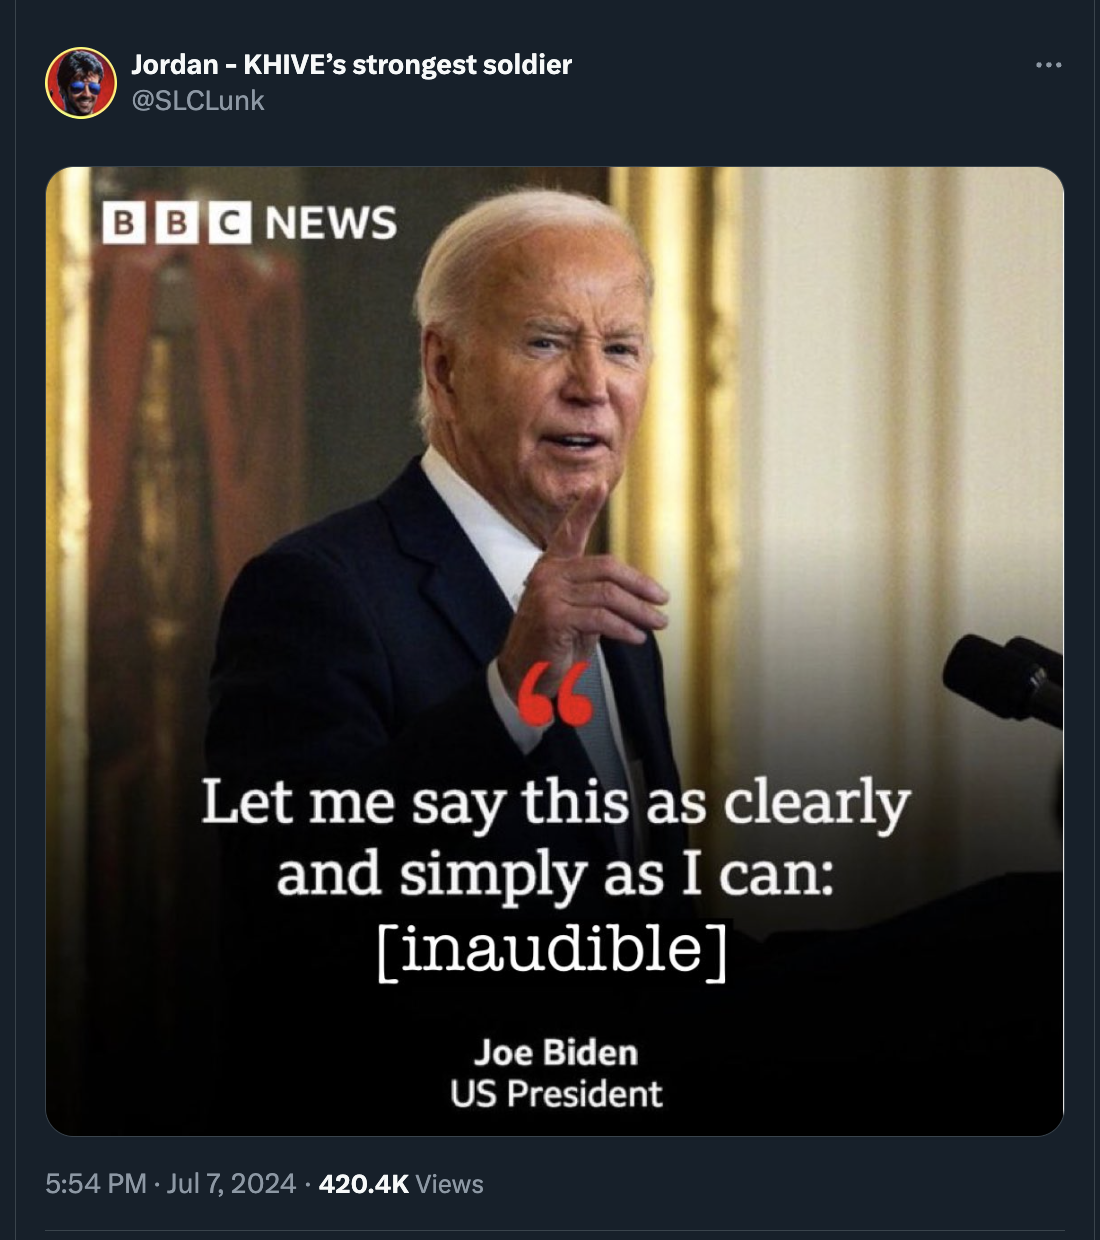 Internet meme - Jordan Khive's strongest soldier Bbc News Let me say this as clearly and simply as I can inaudible Joe Biden Us President Views